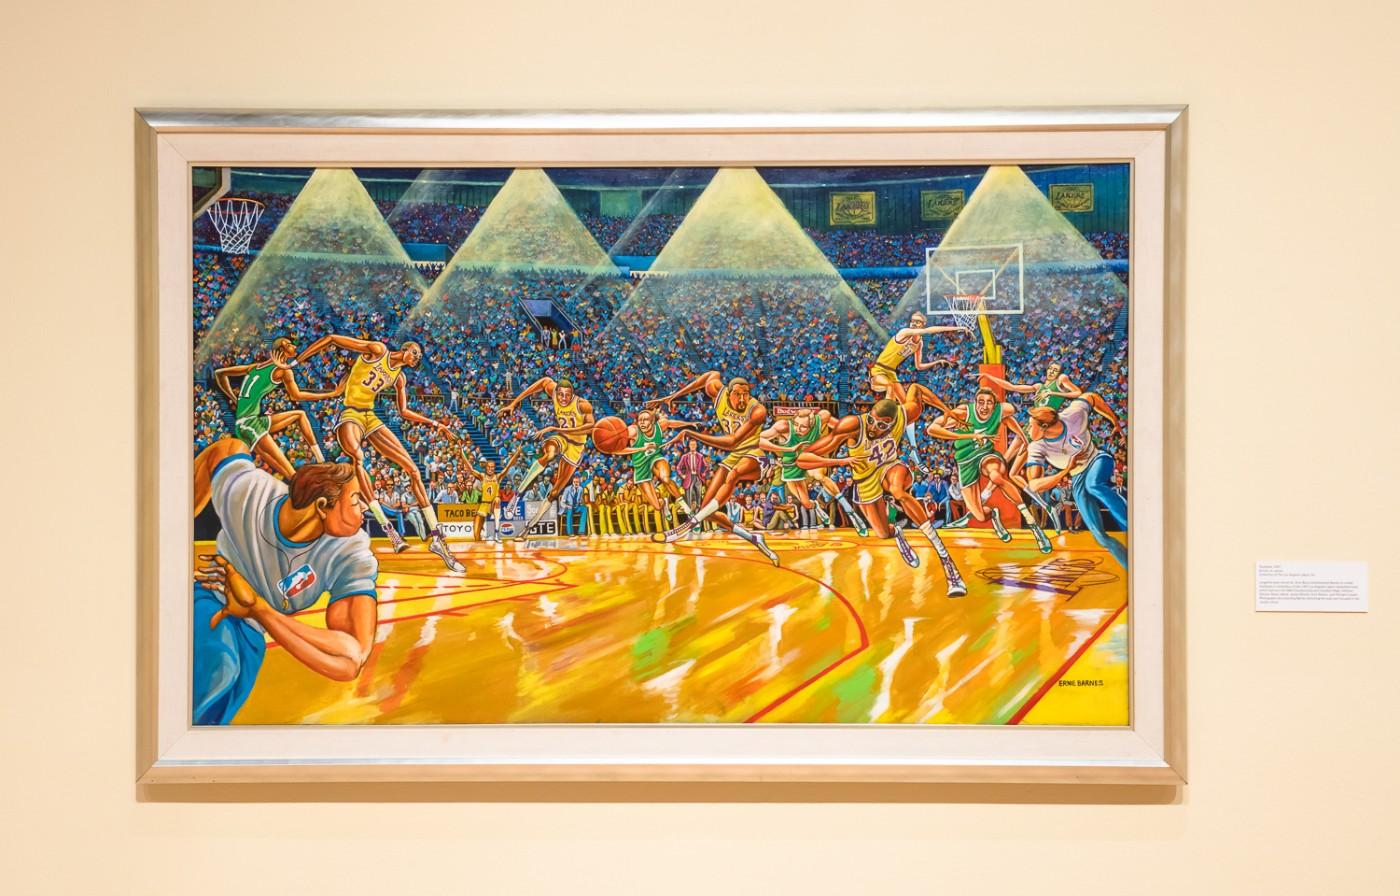 Ernie Barnes, Fastbreak, 1987. Acrylic on canvas. Collection of The Los Angeles Lakers, Inc.